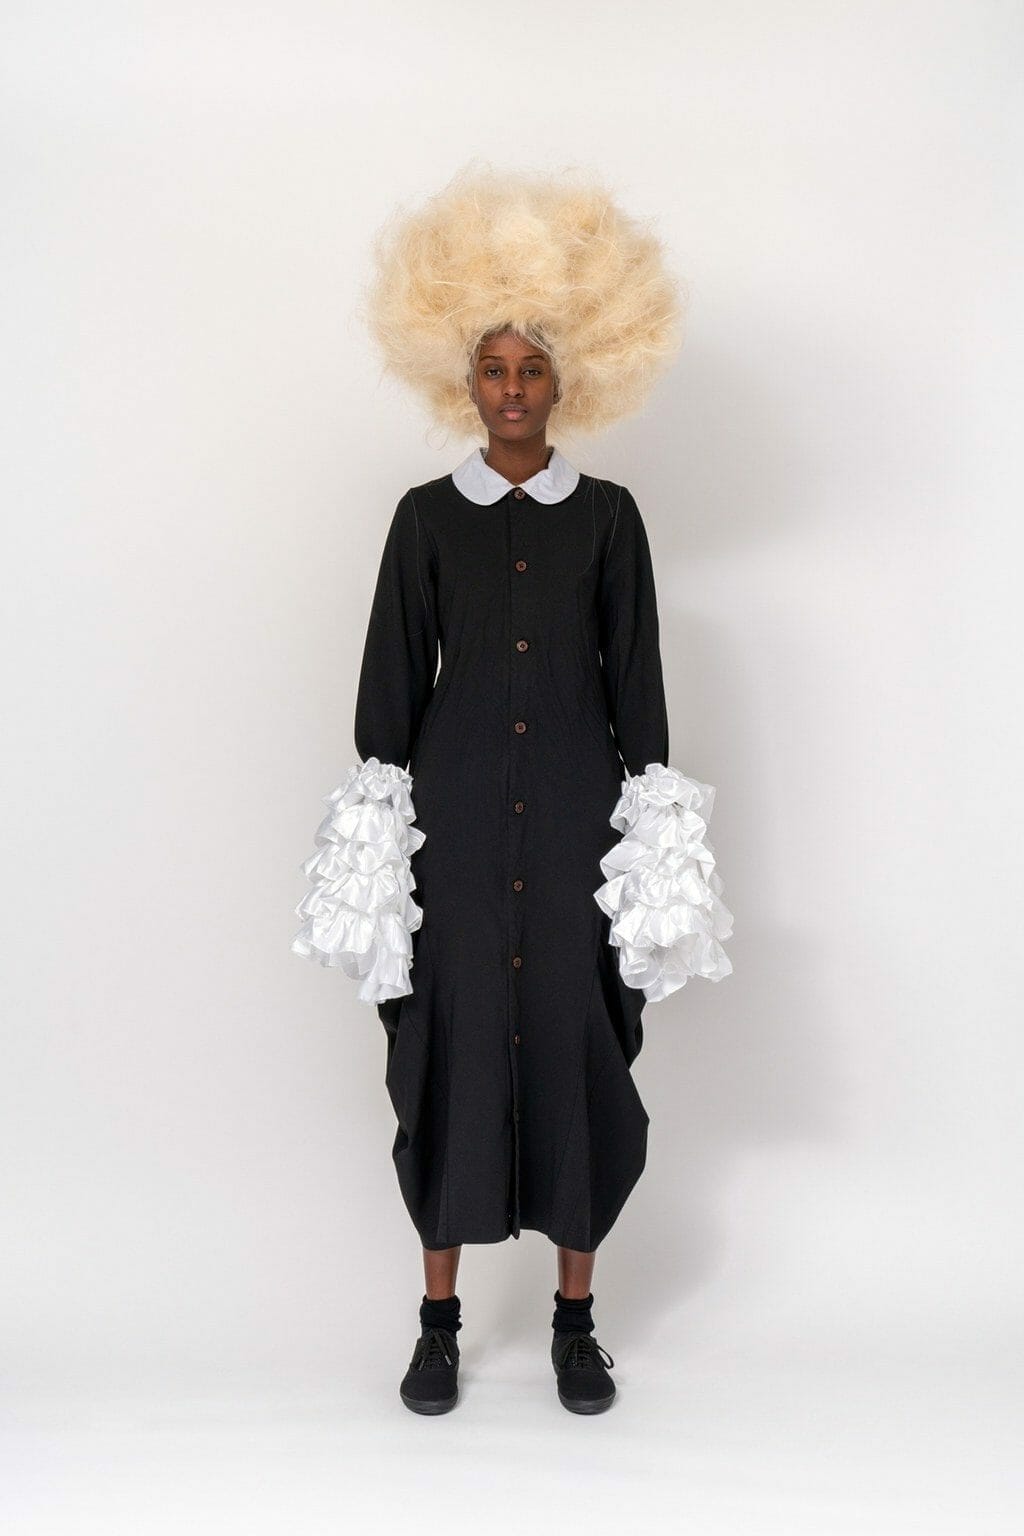 Comme des Garcons Pre-Fall 2020 Paris. RUNWAY MAGAZINE ® Collections. RUNWAY NOW / RUNWAY NEW